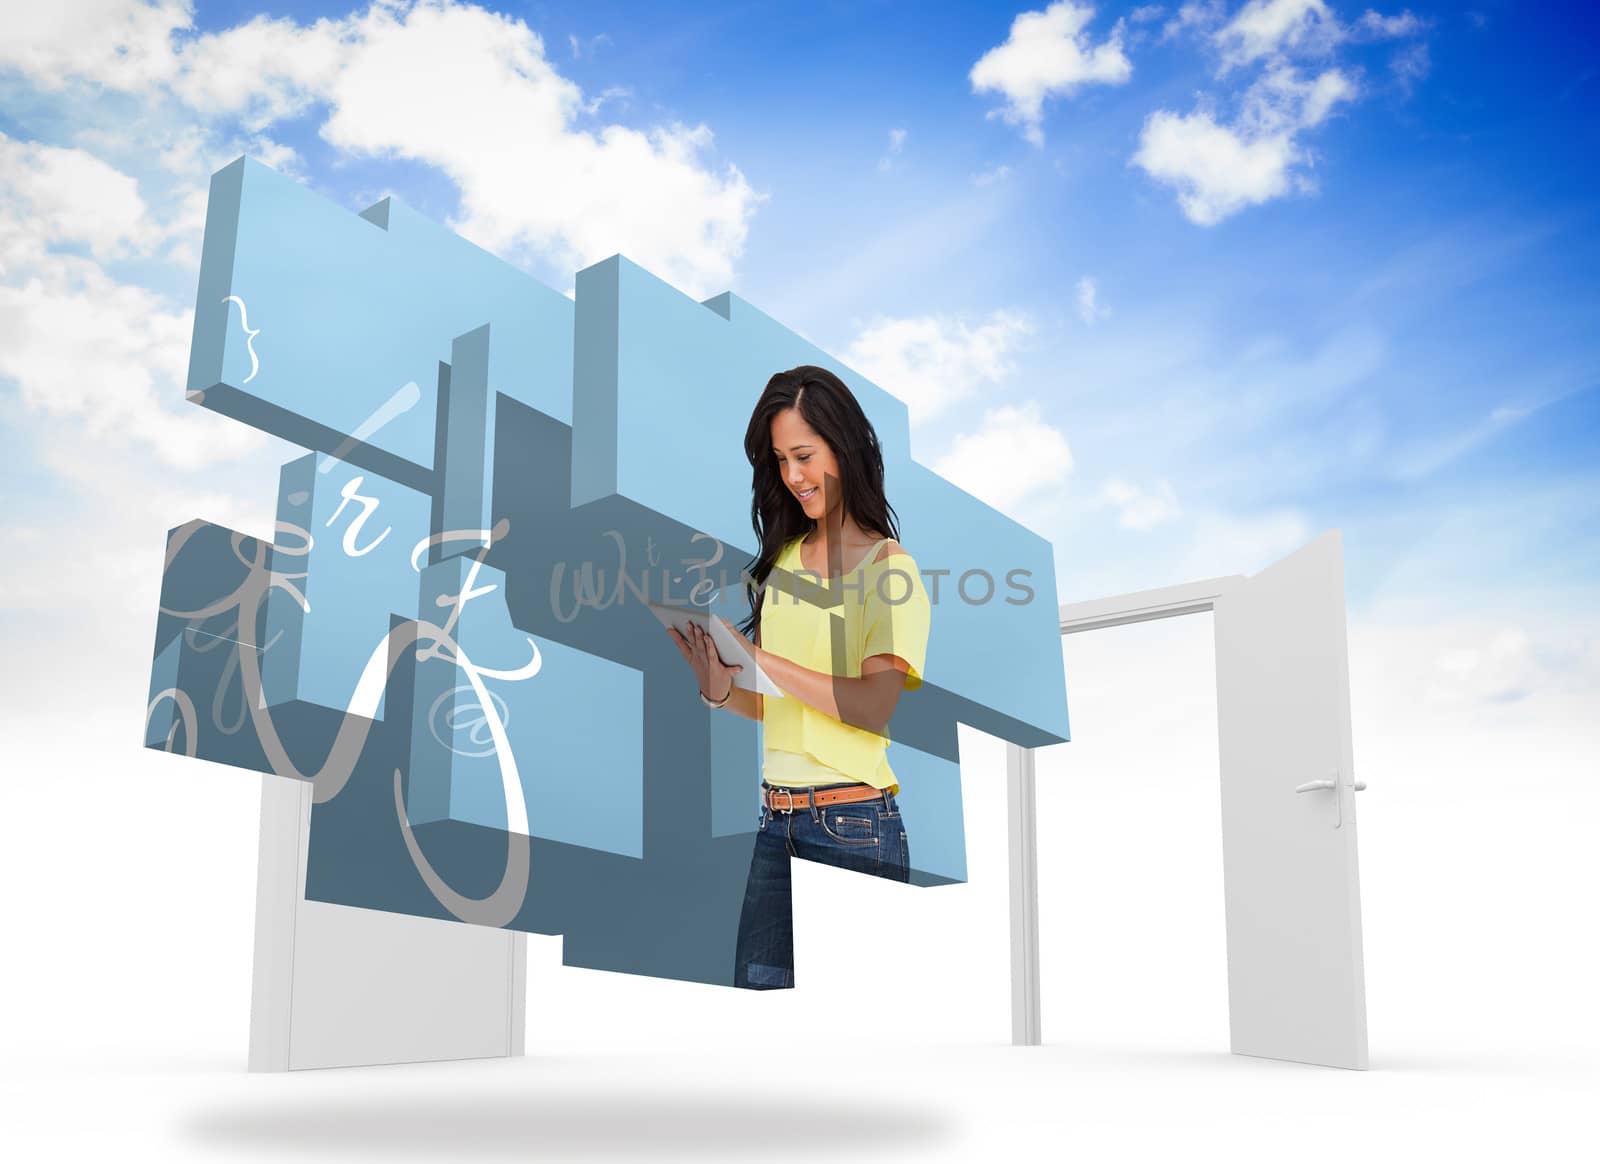 Student using tablet on abstract screen against closed and open doors in sky